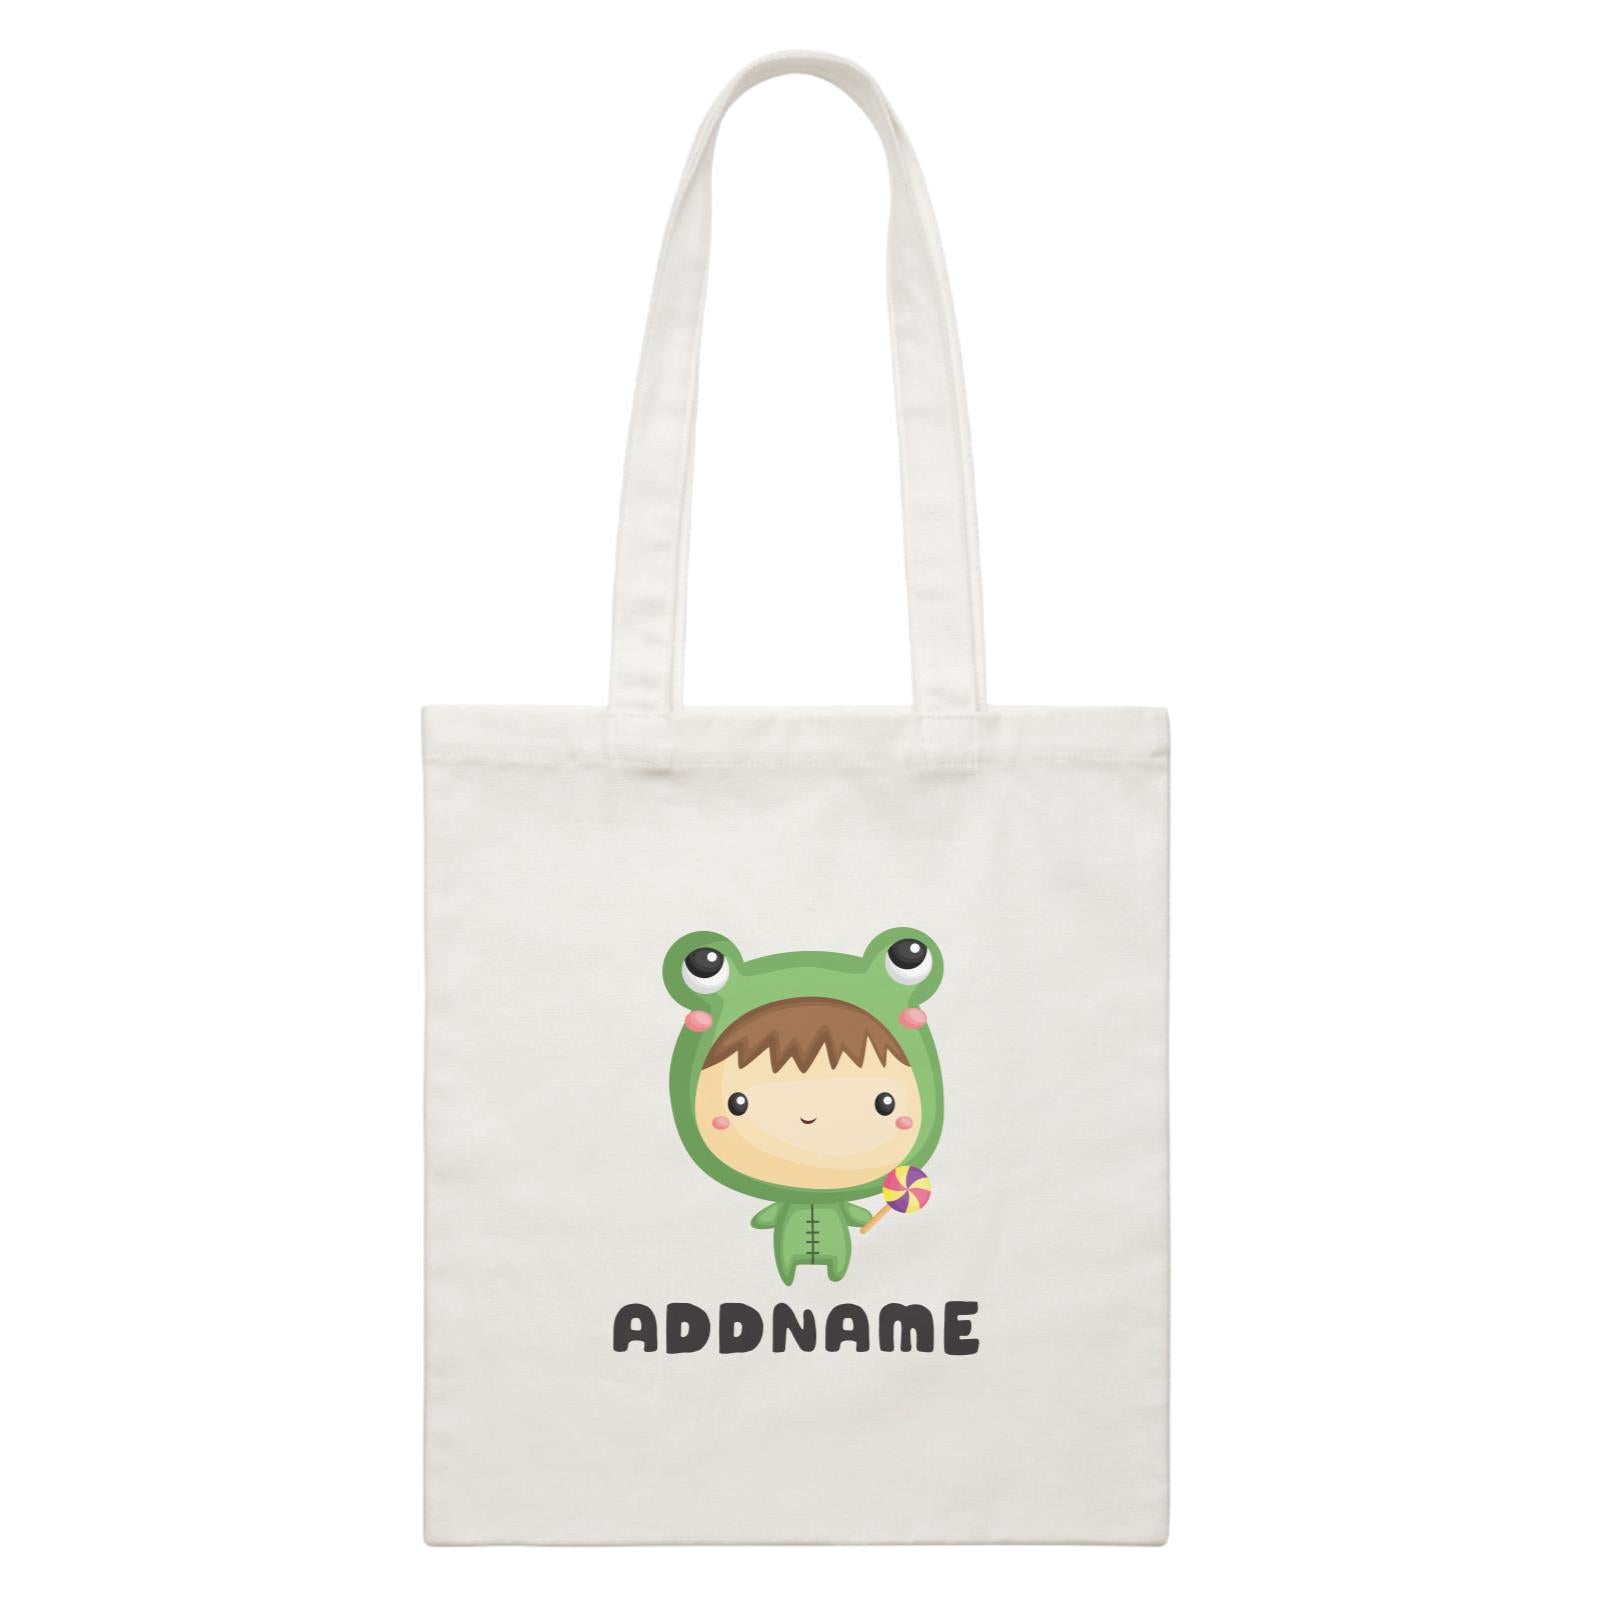 Birthday Frog Baby Boy Wearing Frog Suit Holding Lolipop Addname White Canvas Bag